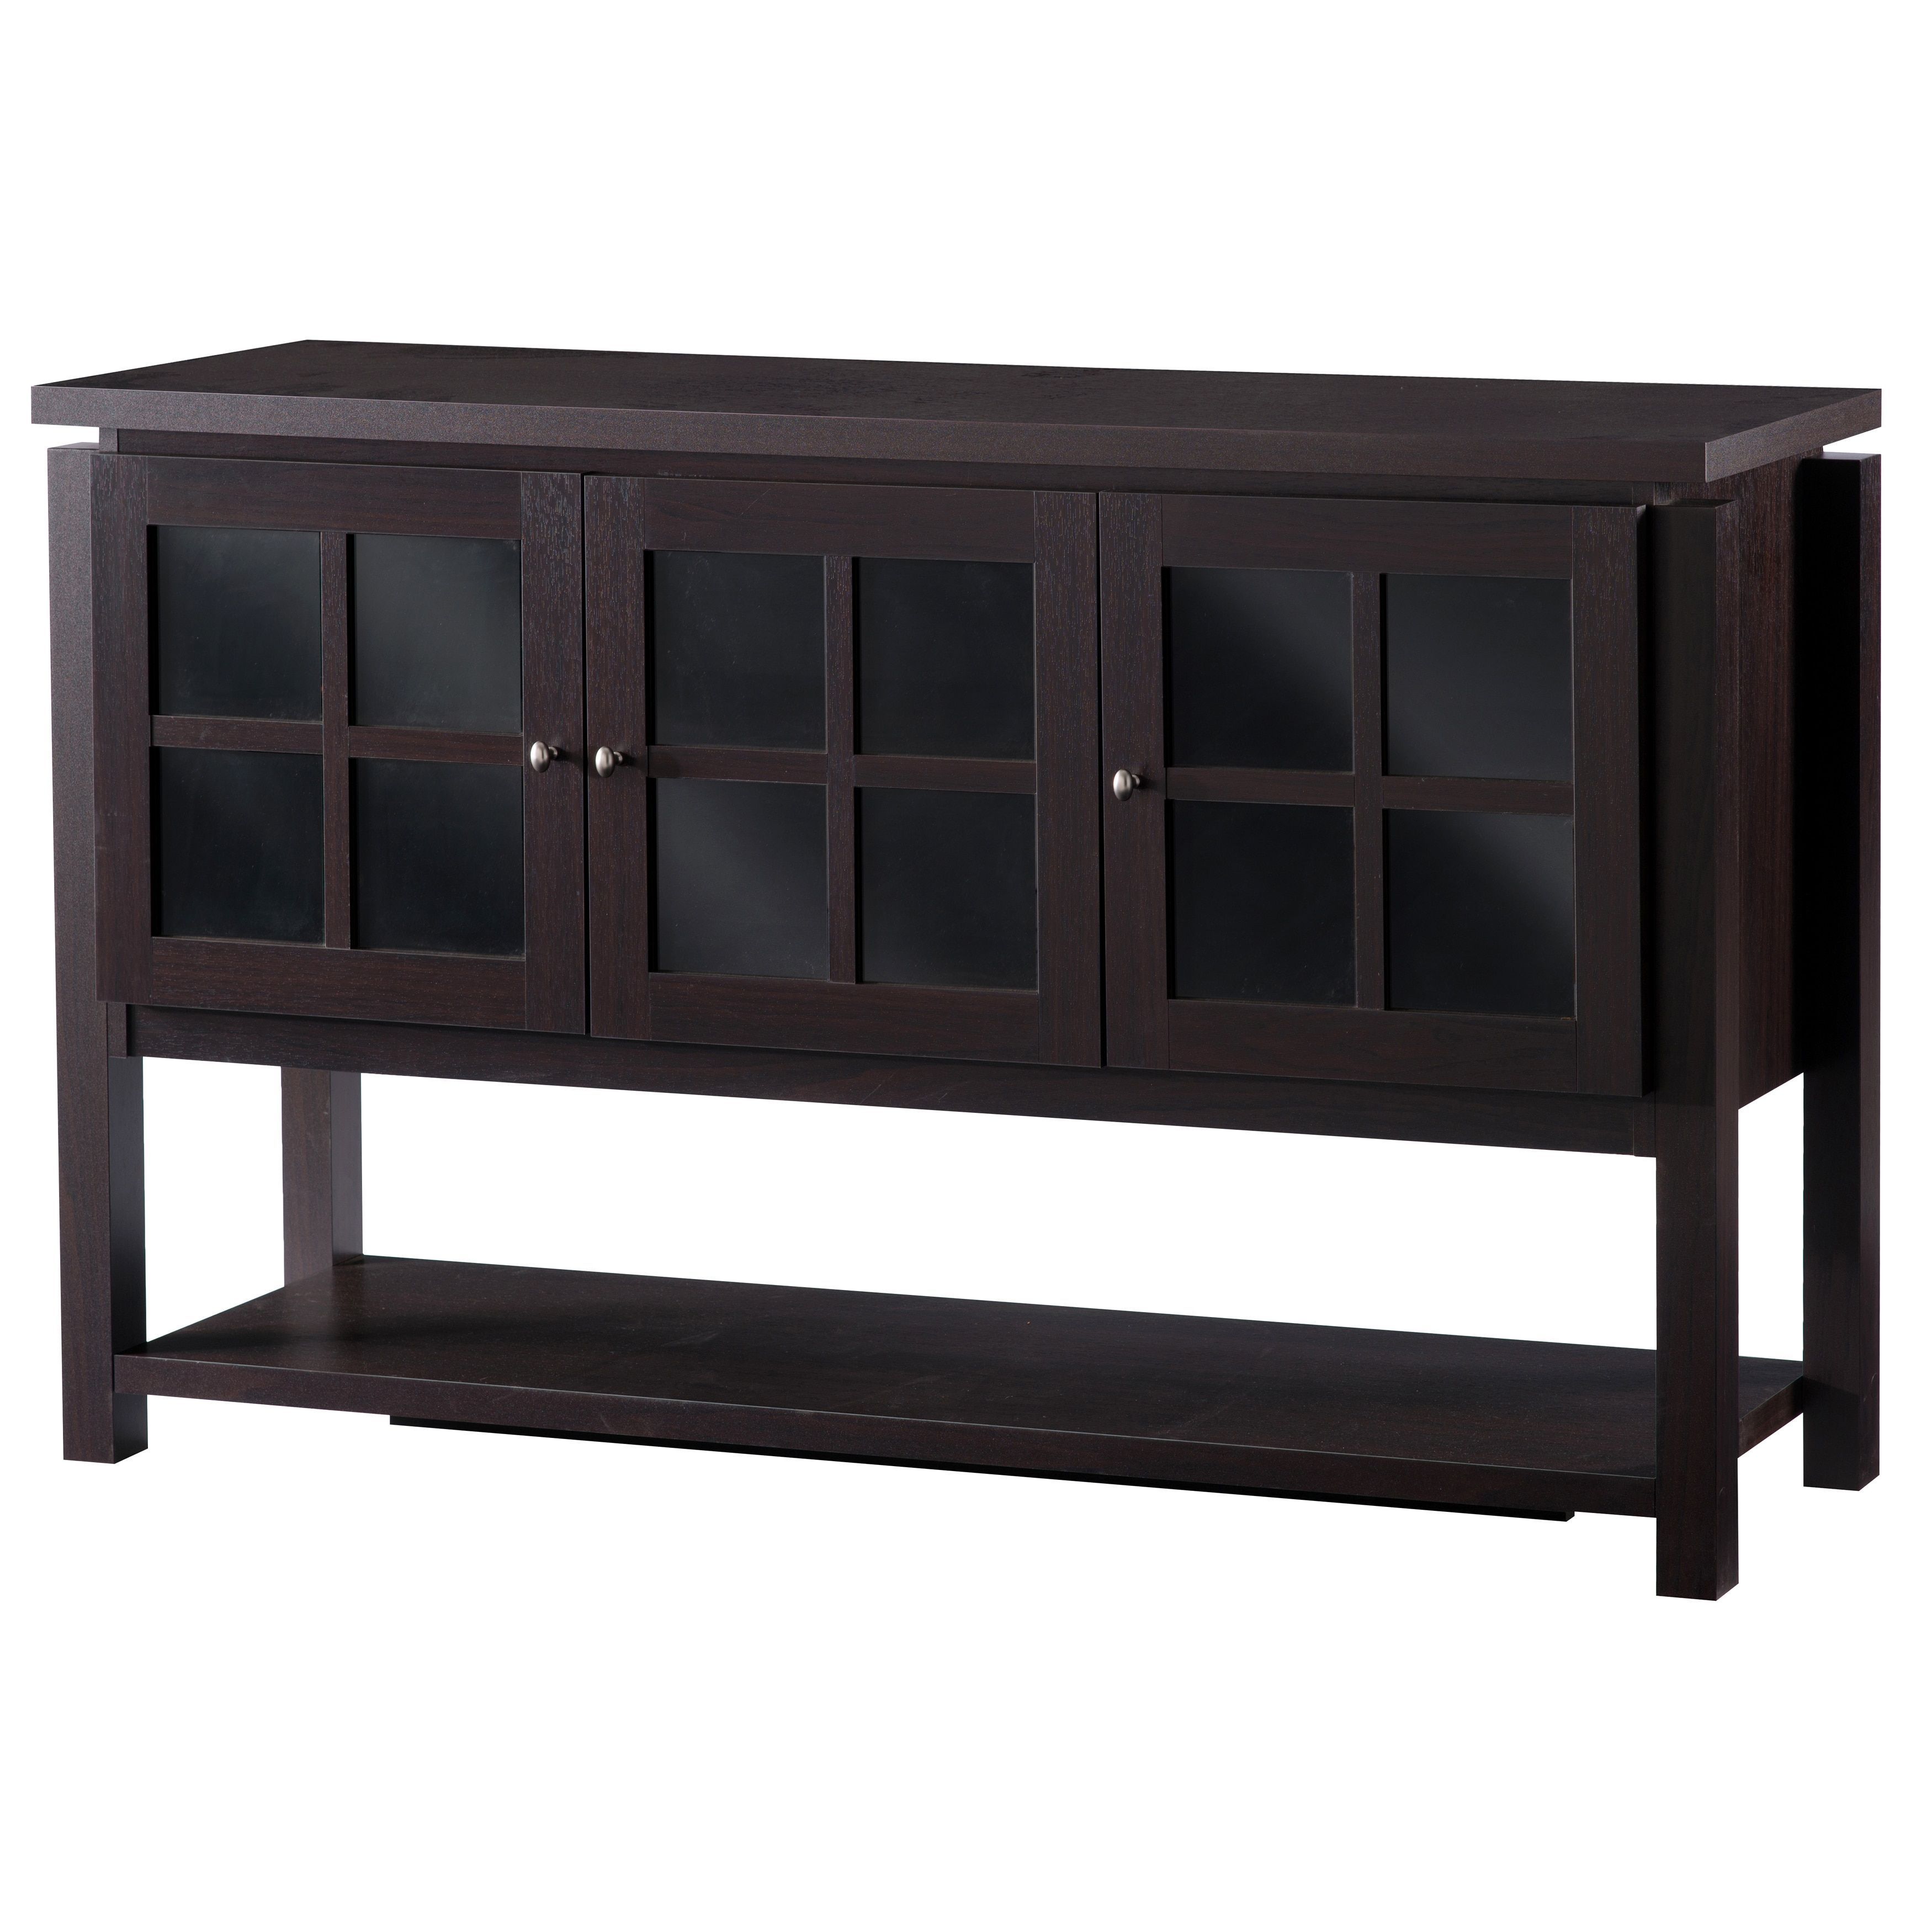 World Menagerie Armelle Sideboard In 2019 | Products | Black Inside Armelle Sideboards (View 30 of 30)